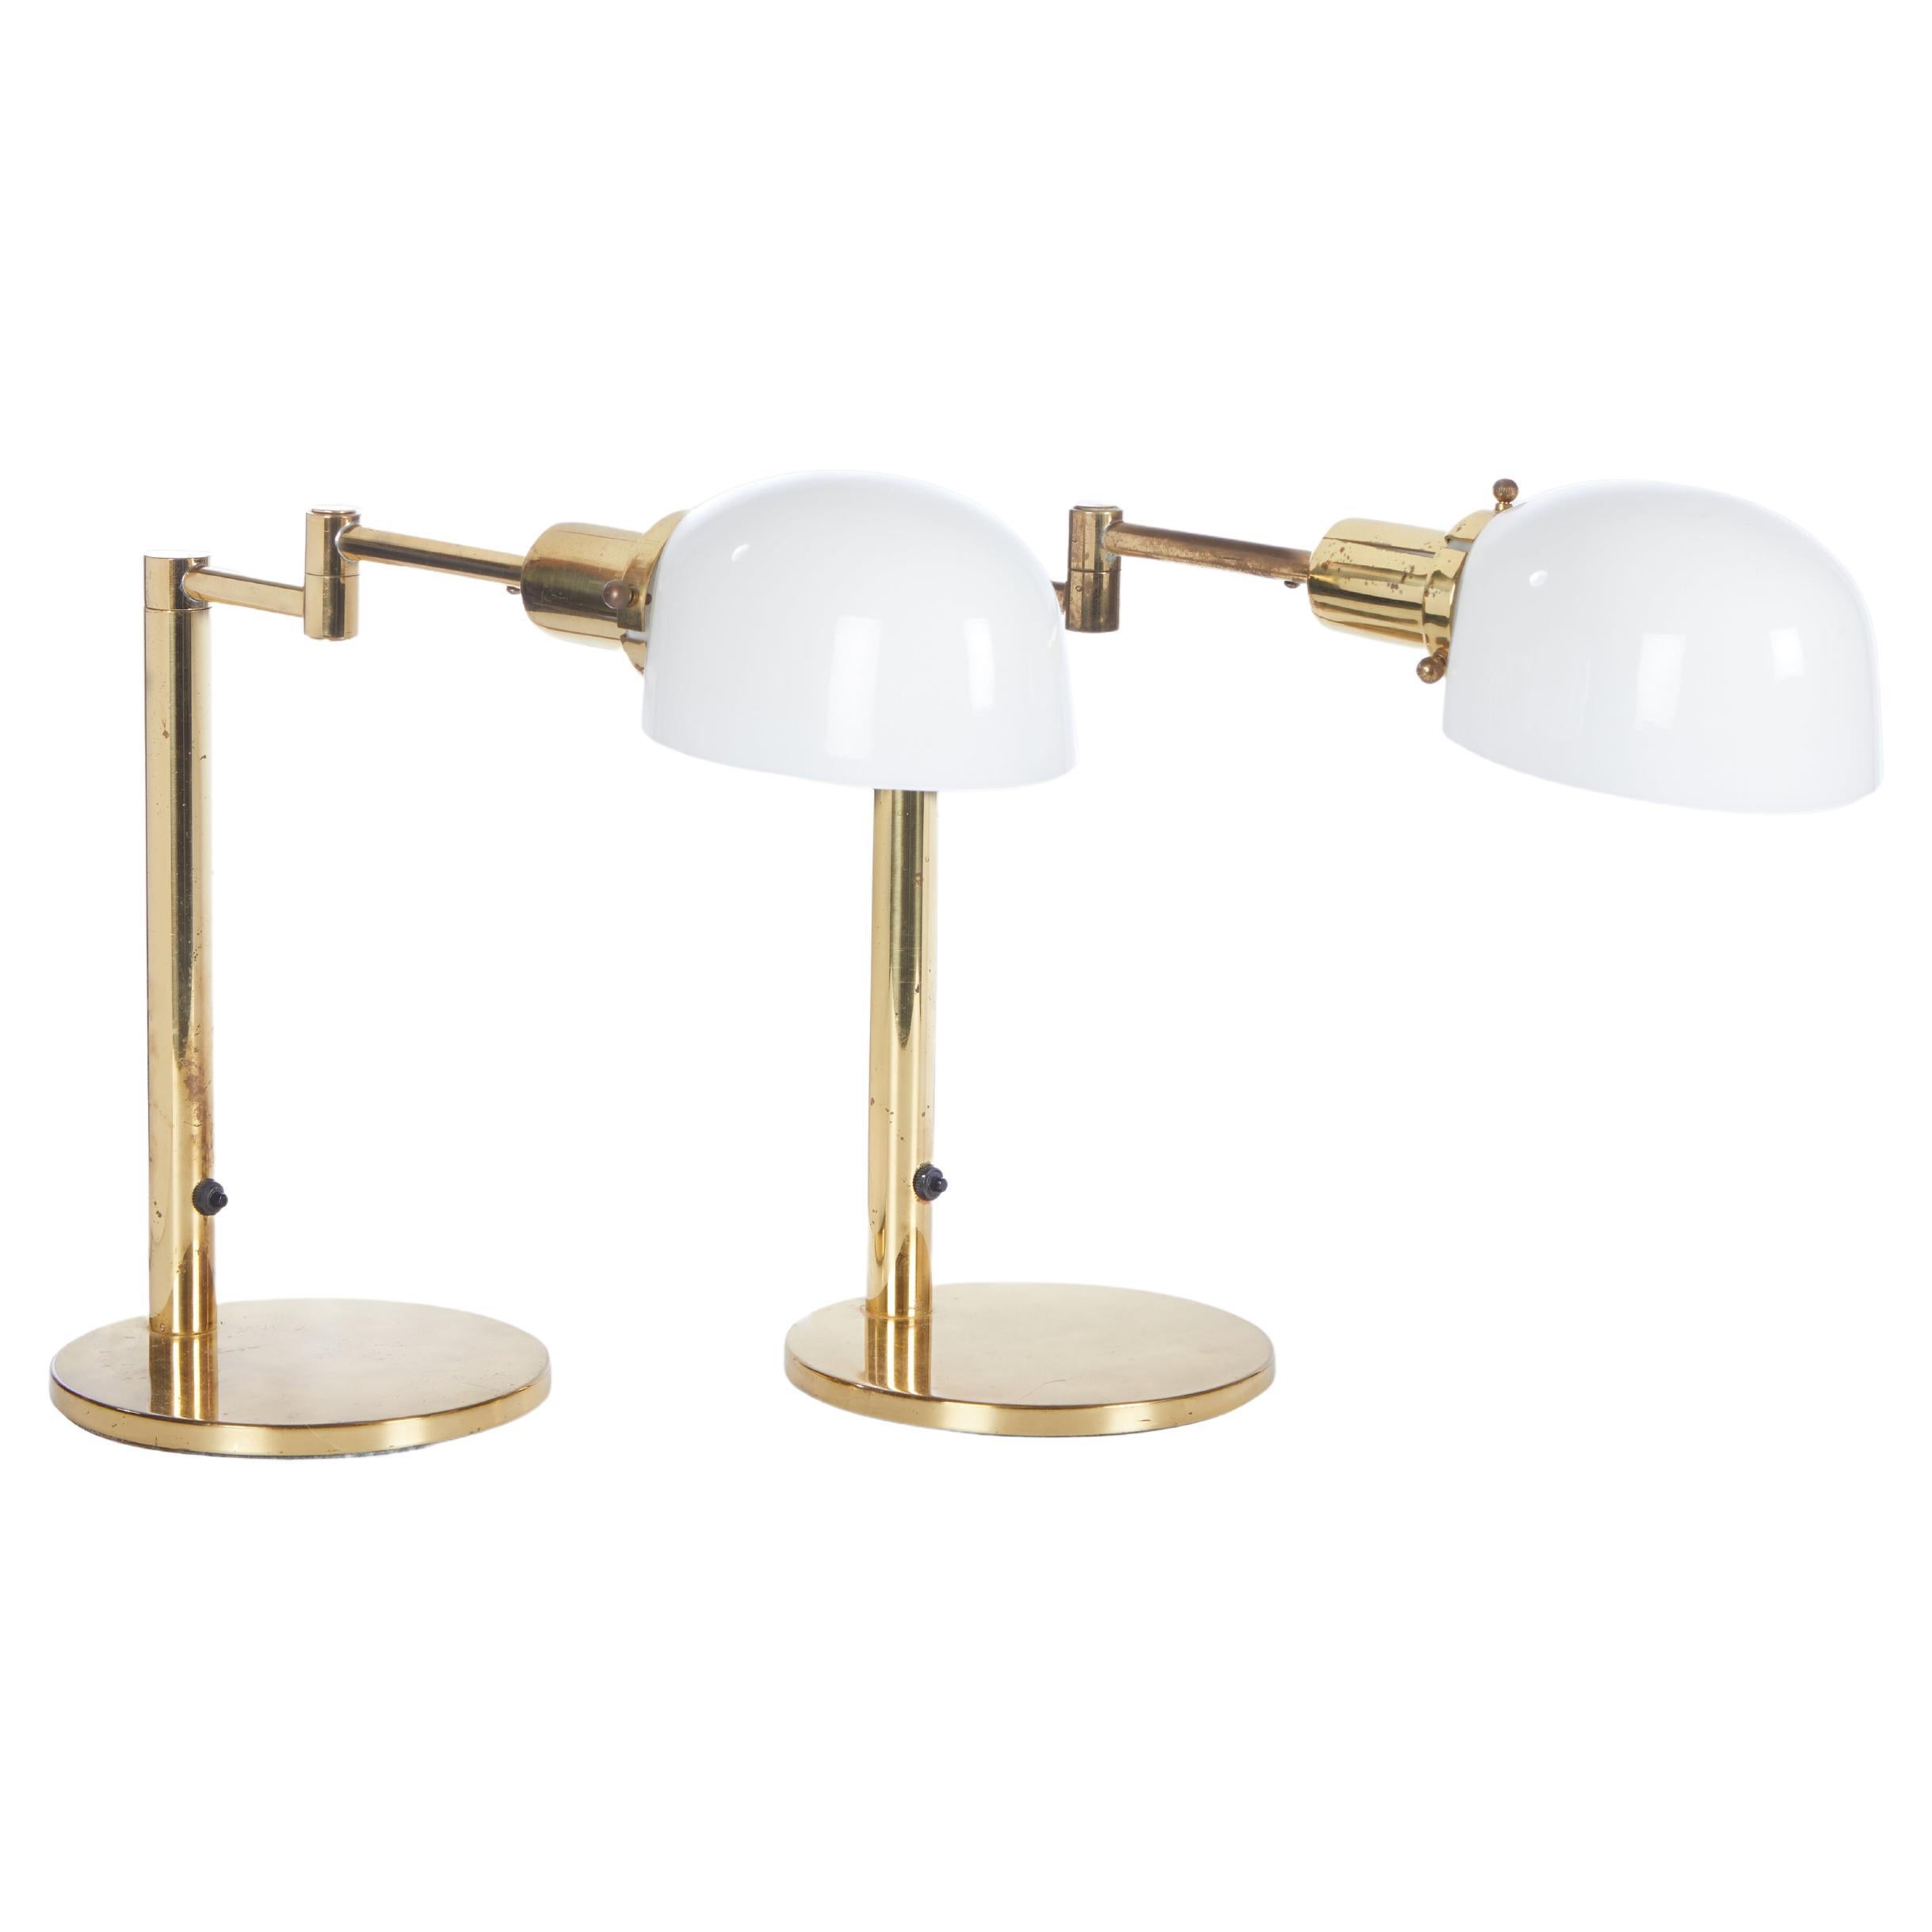 Pair of American Swing Arm Table Lamps in Polished Brass with Round Bases